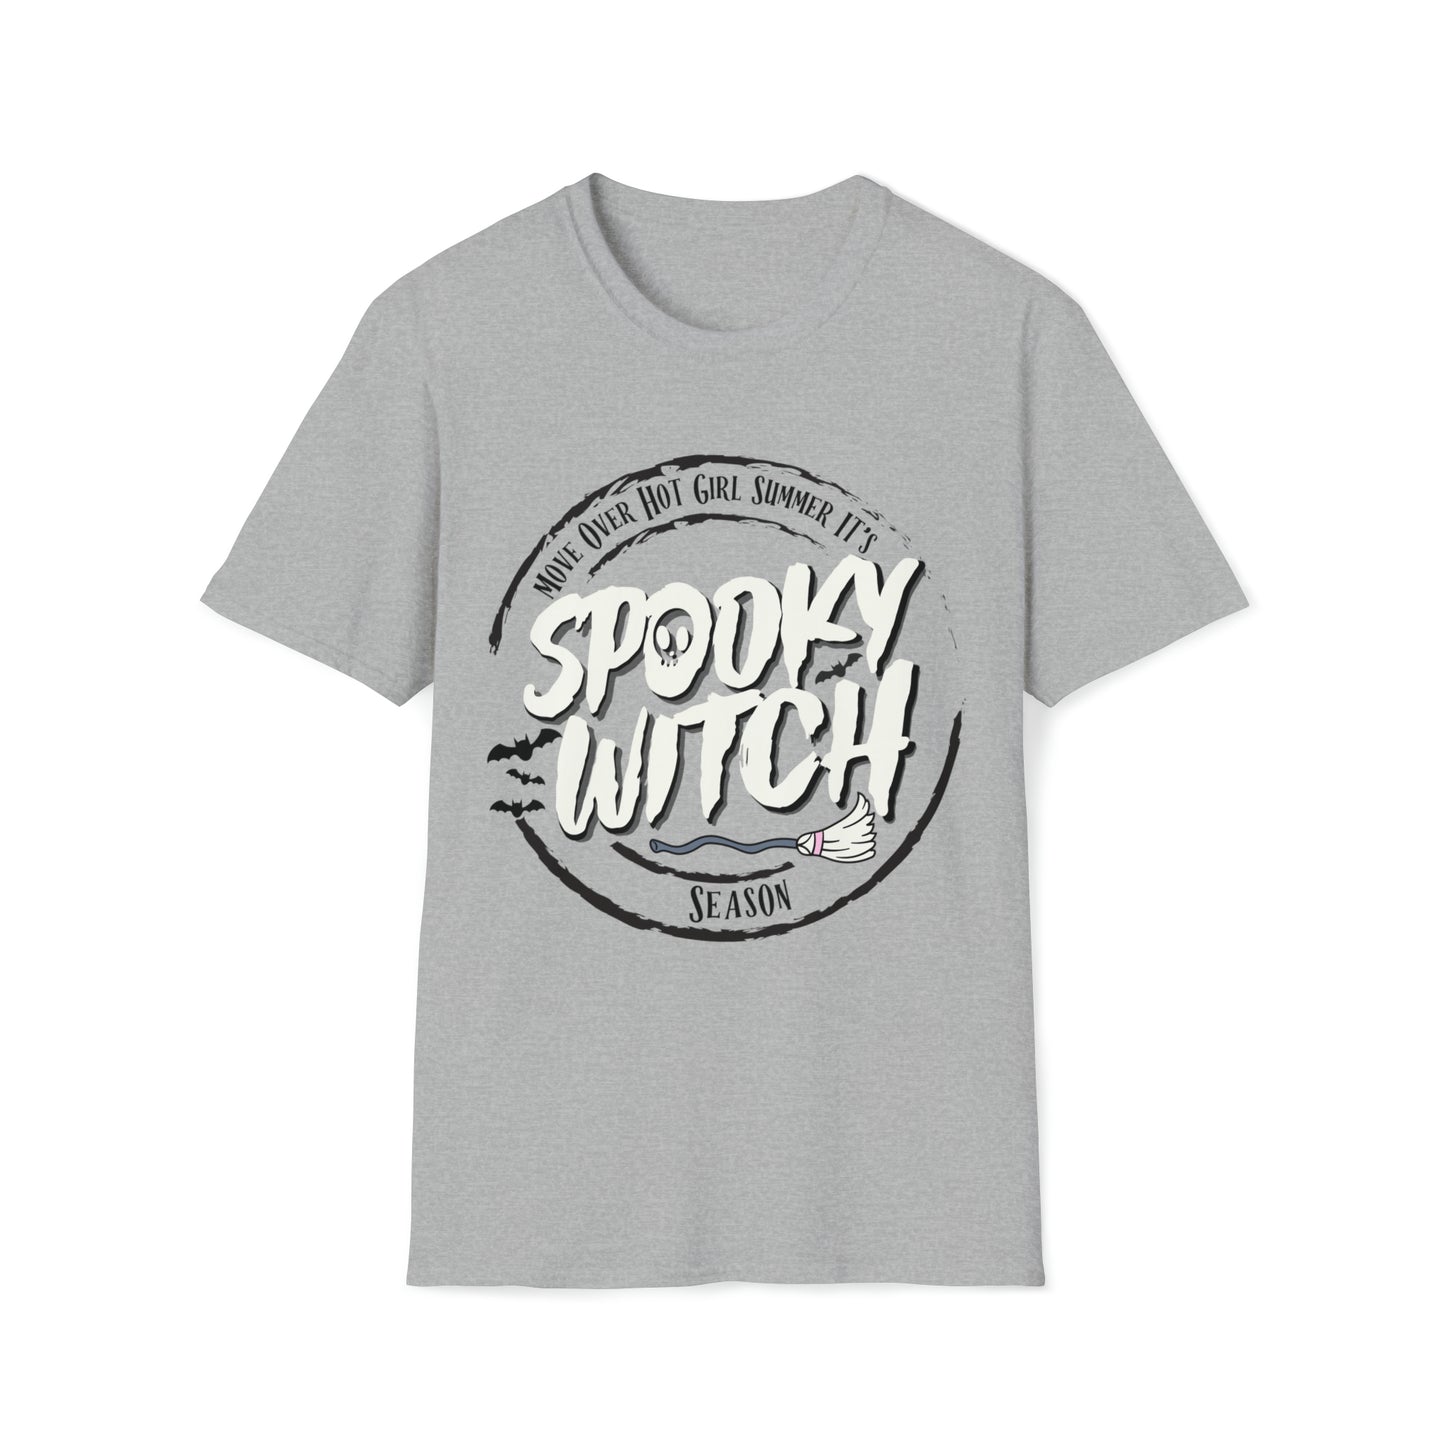 Spooky Witch Season - Unisex Softstyle T-Shirt